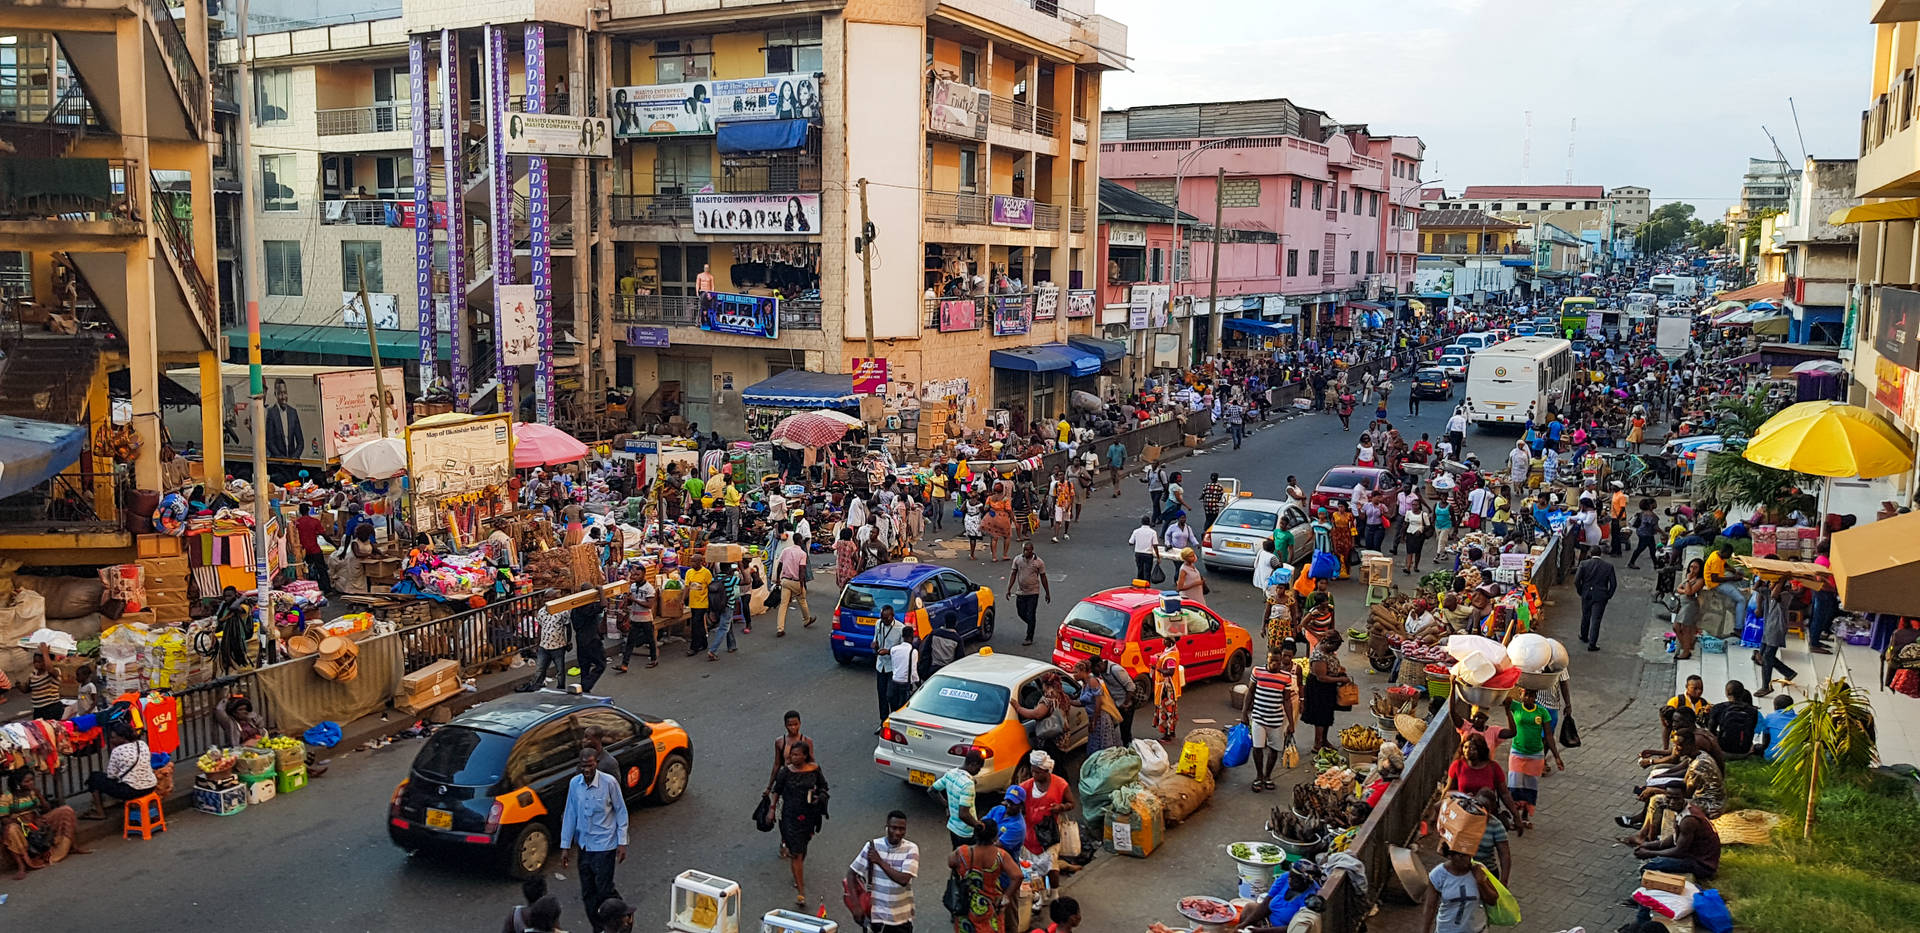 Bustling City Life In Central Accra, Ghana